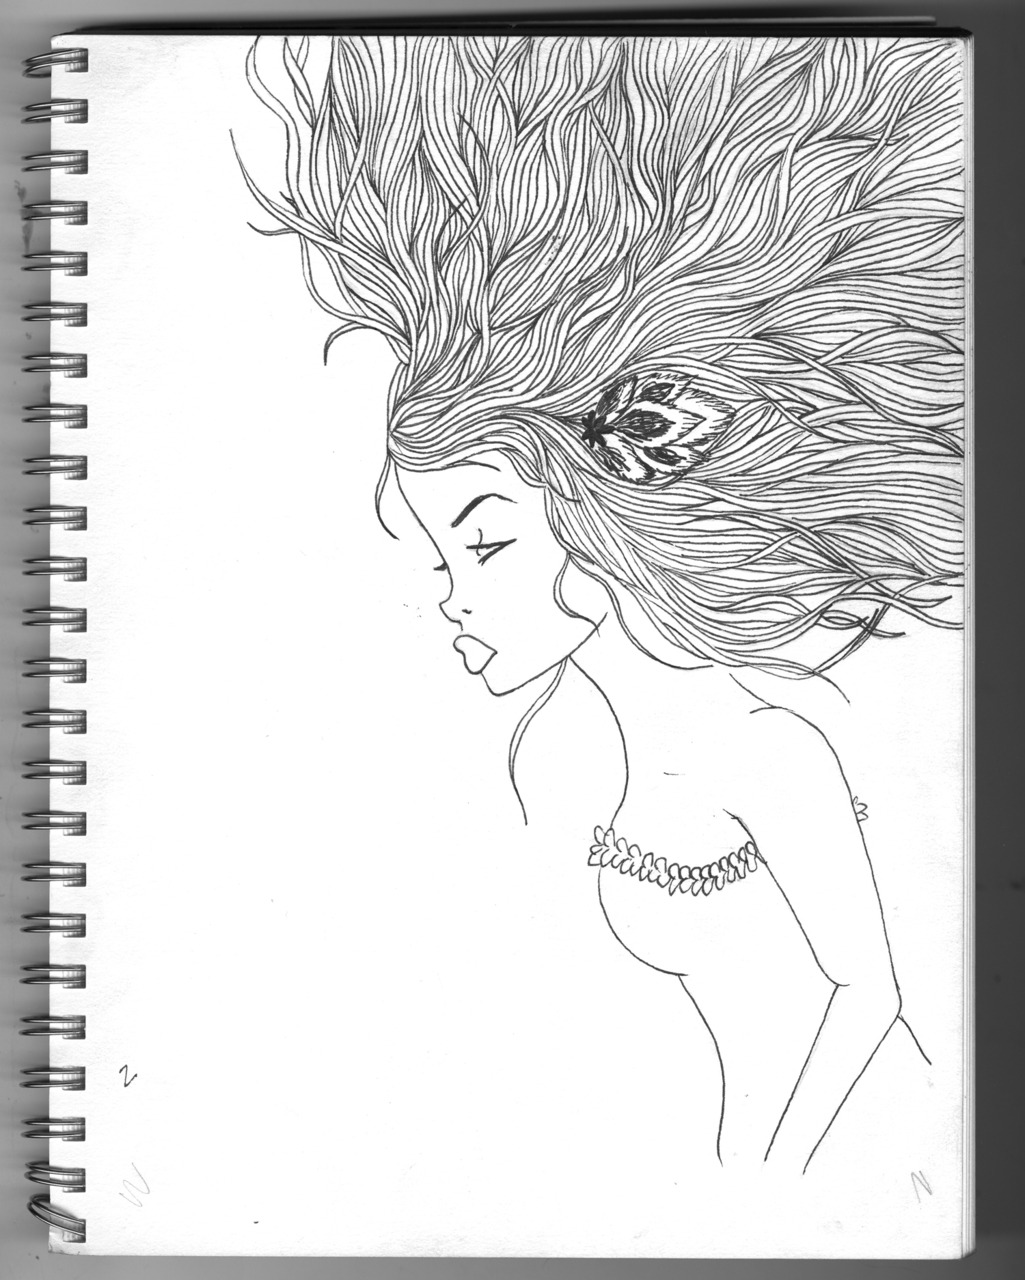 Just something hangin’ out in my sketchbook. That day I happened to be quite inspired by hair I’m assuming. I plan to do something with this one of these days.